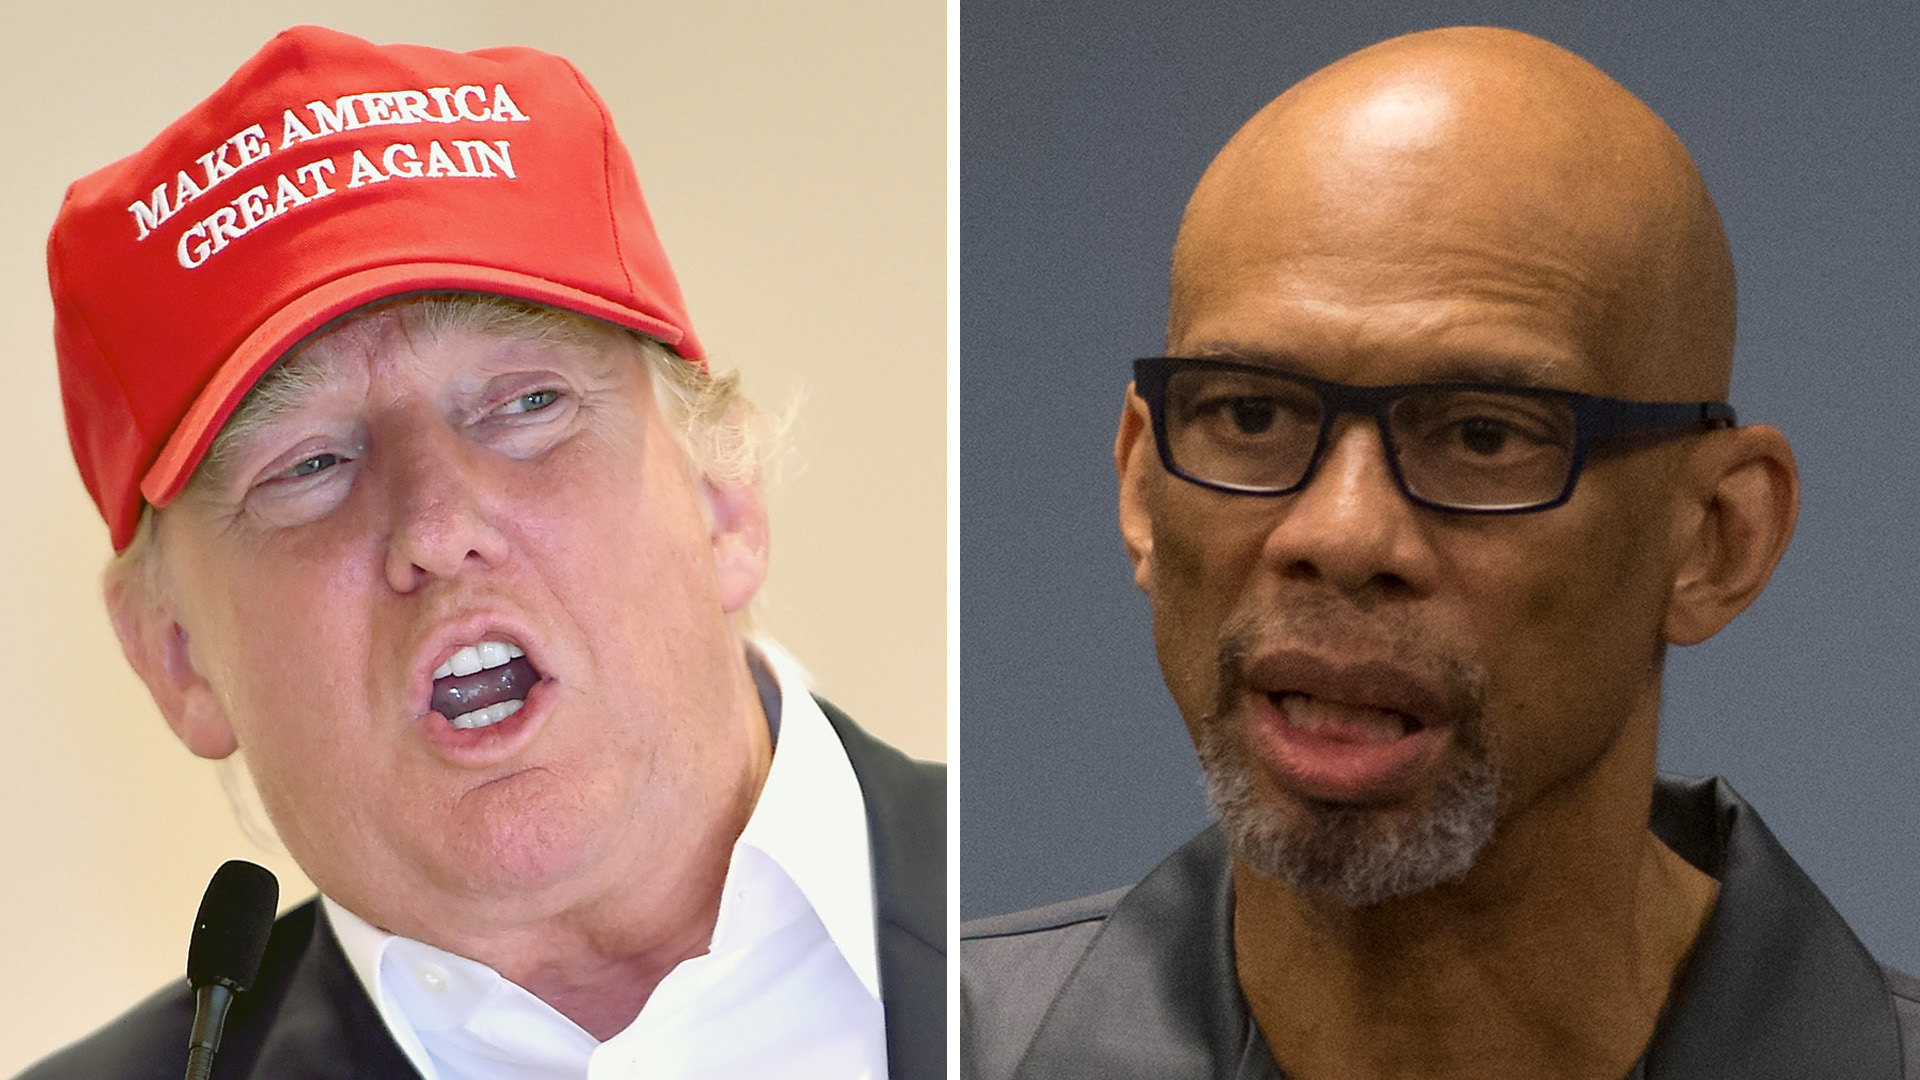 Kareem Abdul-Jabbar: 'Trump is where he is because of his appeal to racism', US sports